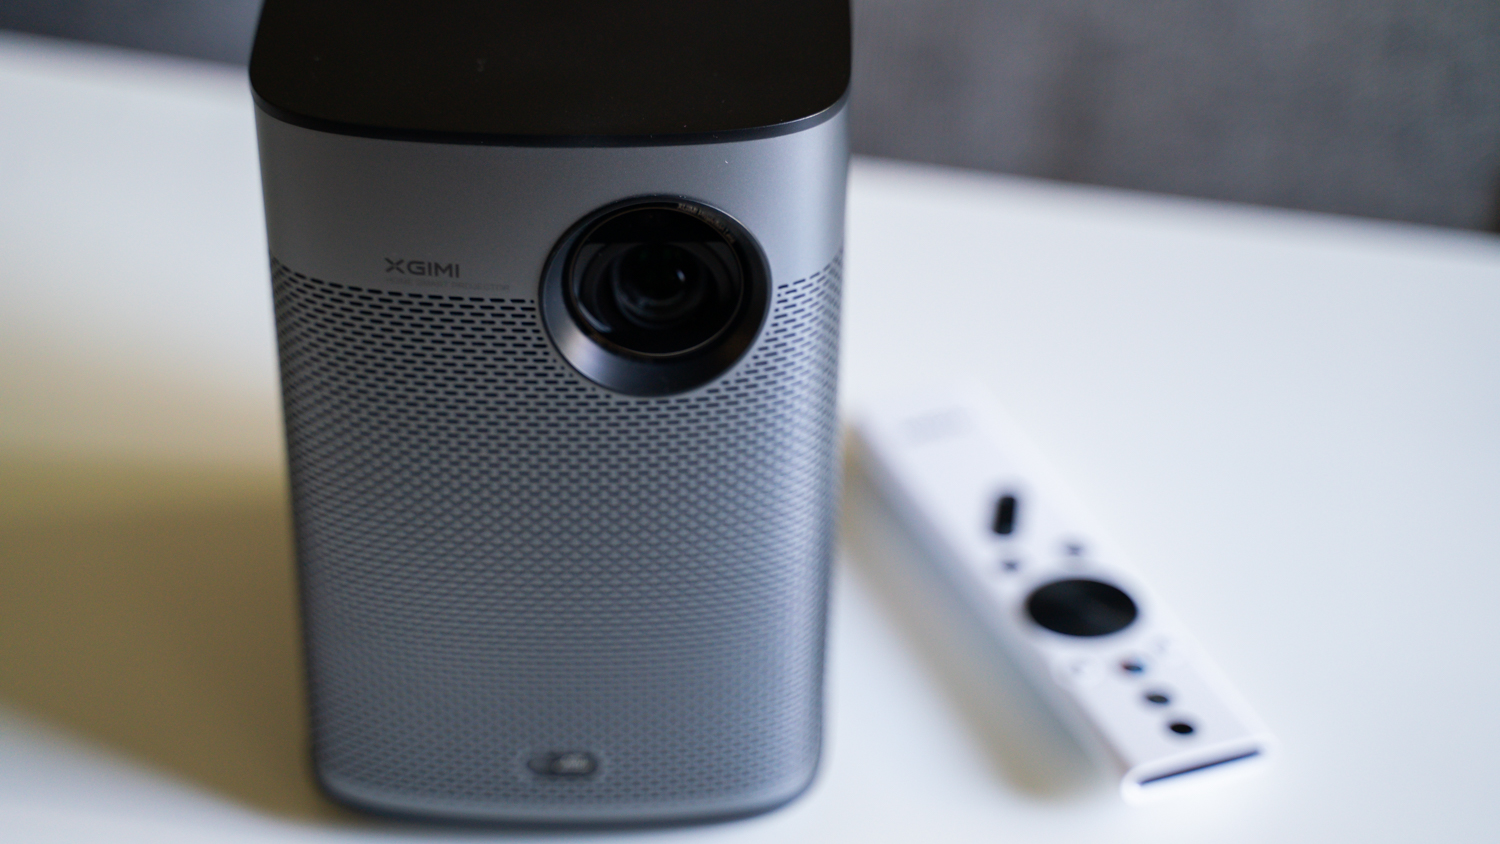 Xgimi Halo+ smart projector review: a practically perfect smart projector